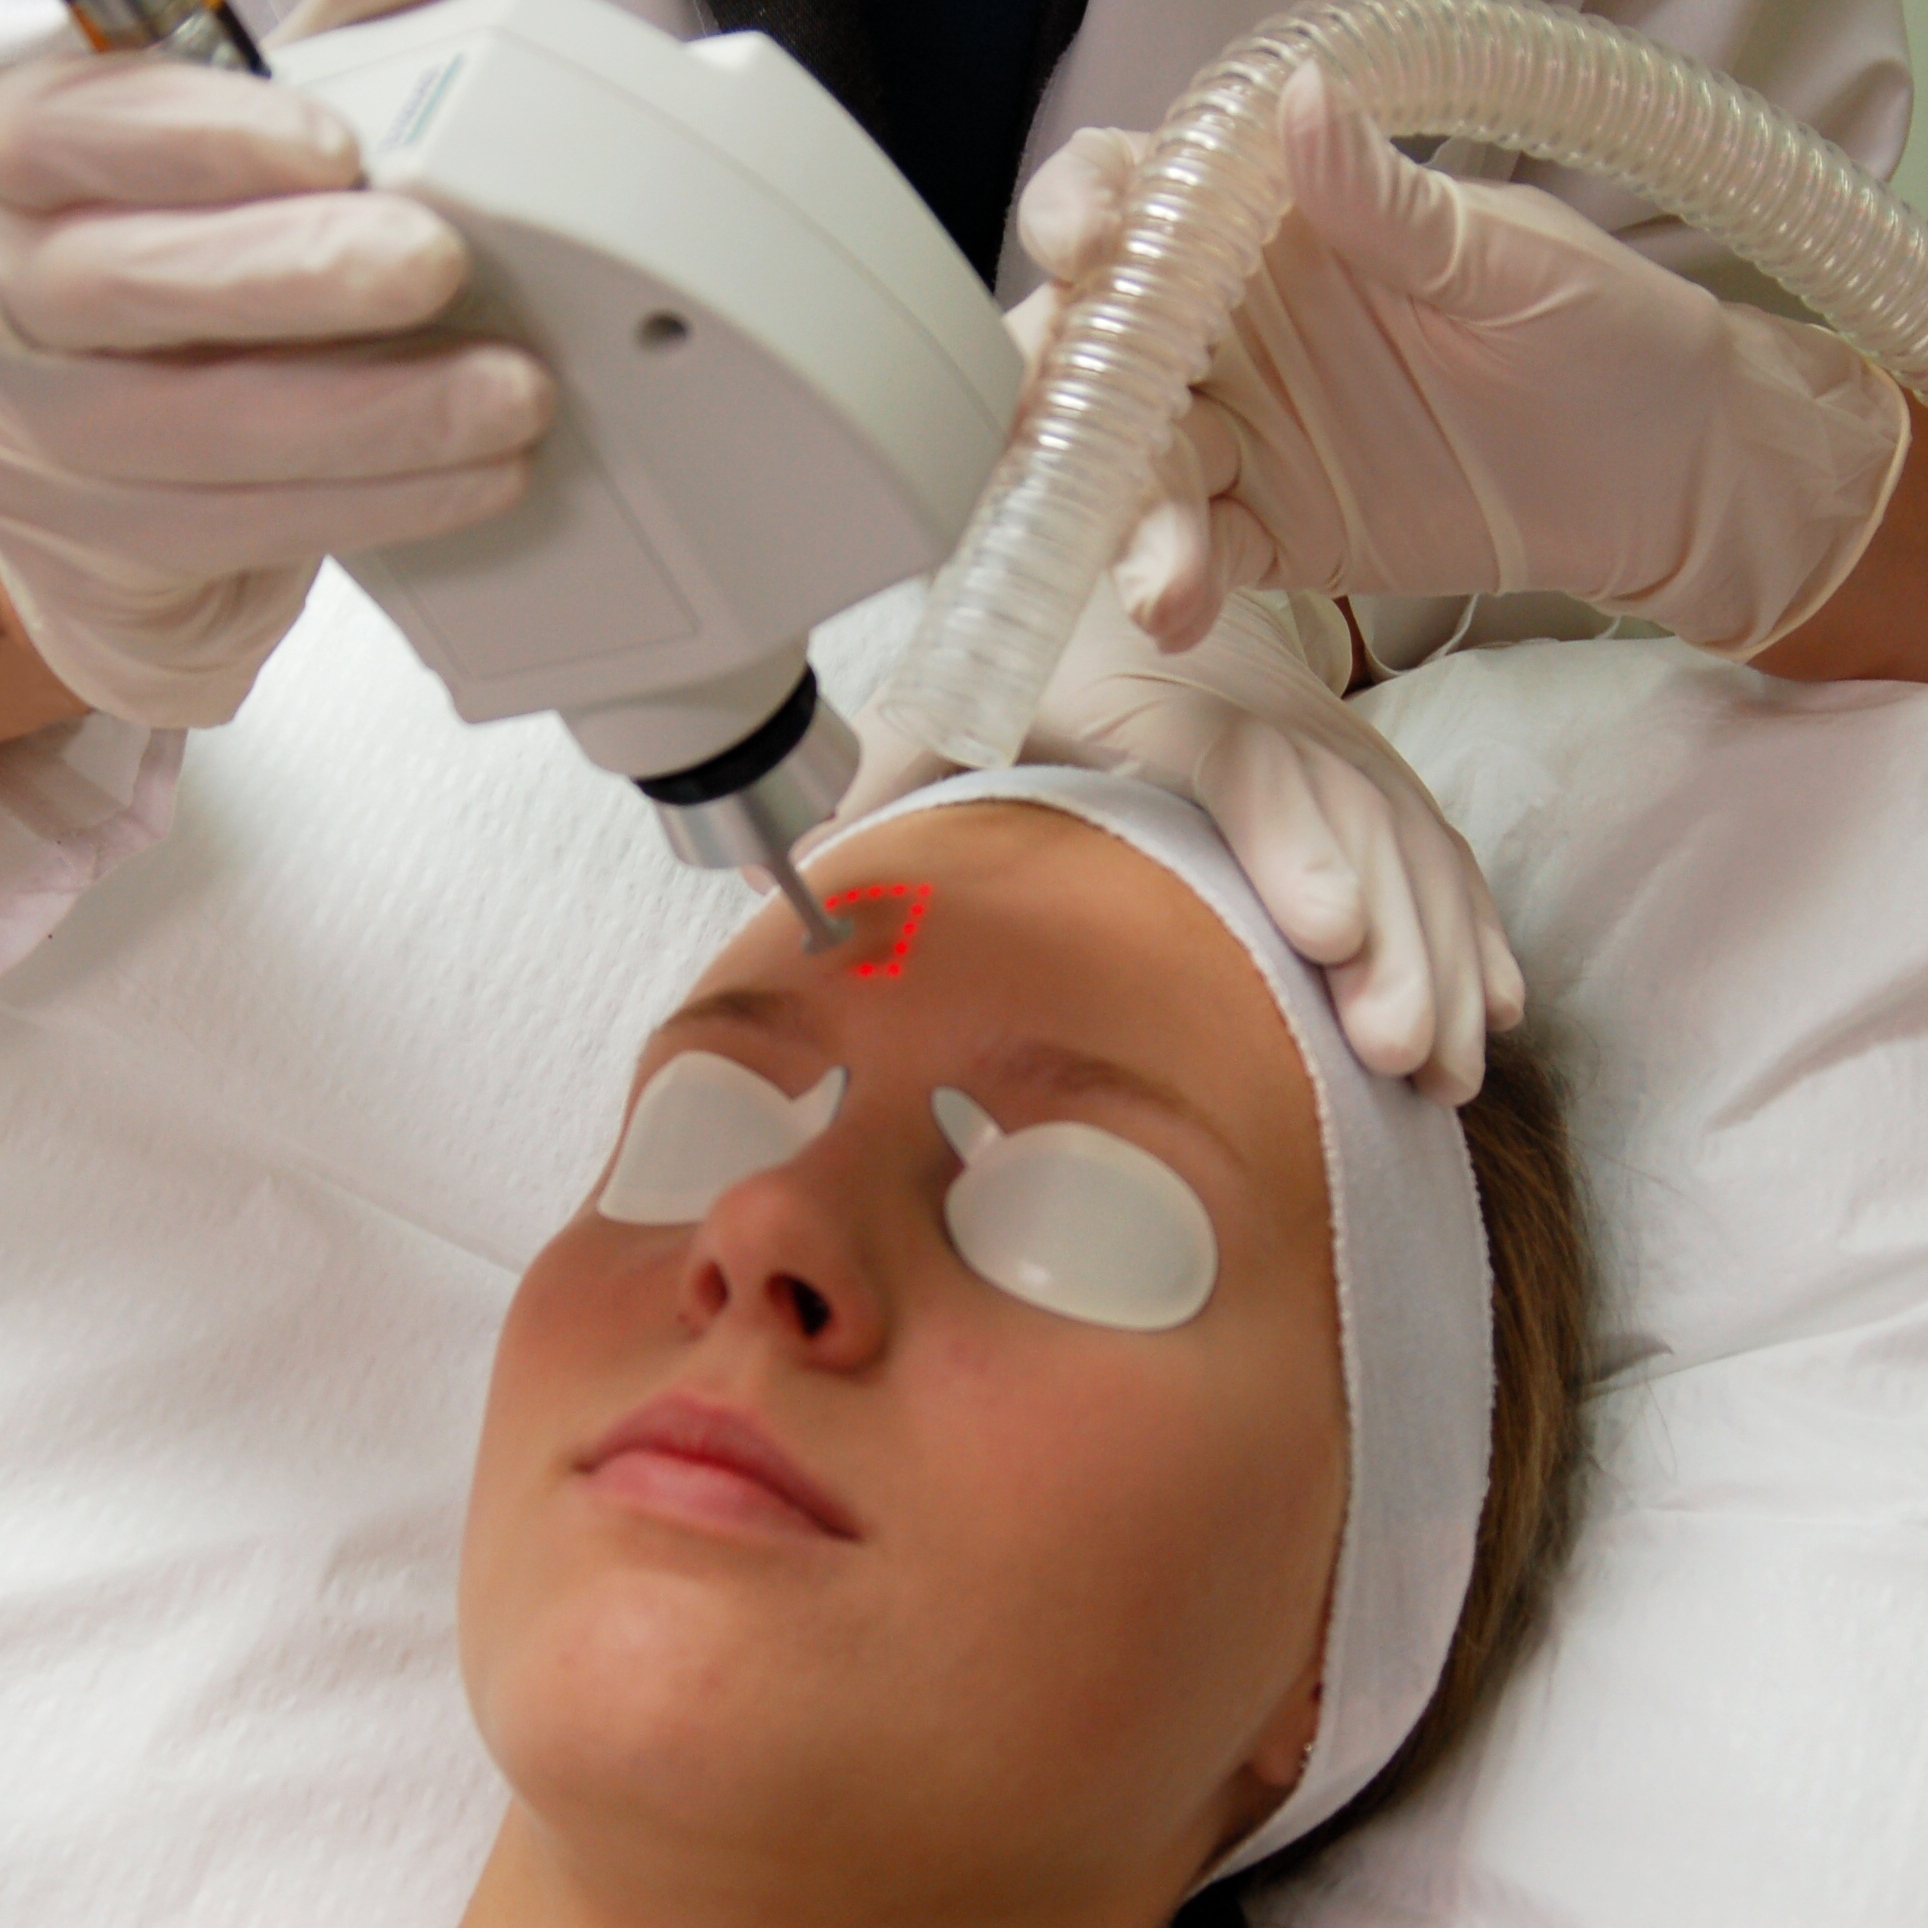 Laser treatment for acne and scars